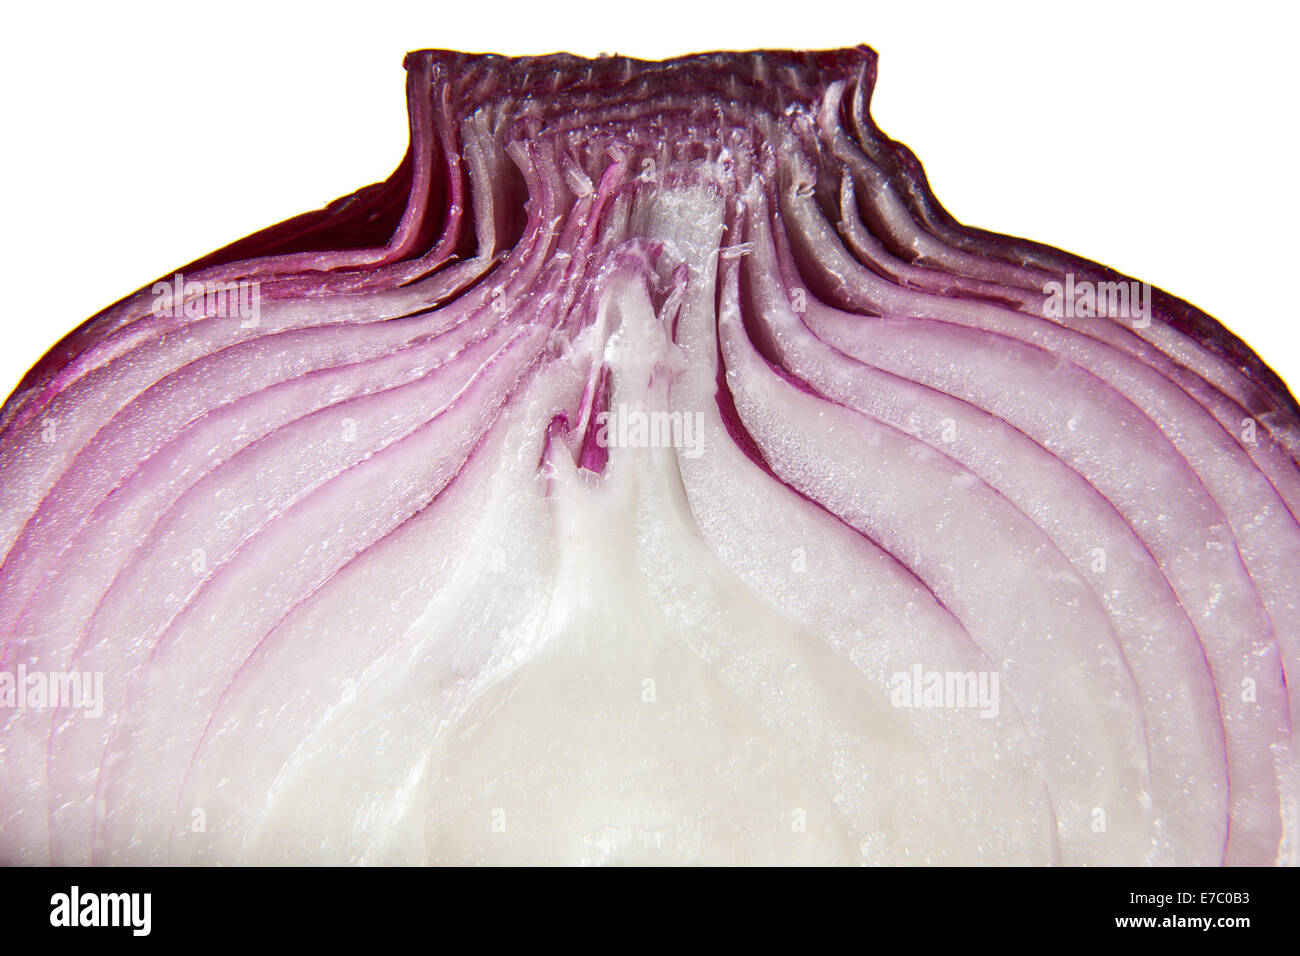 Red onion closeup isolated in white background Stock Photo